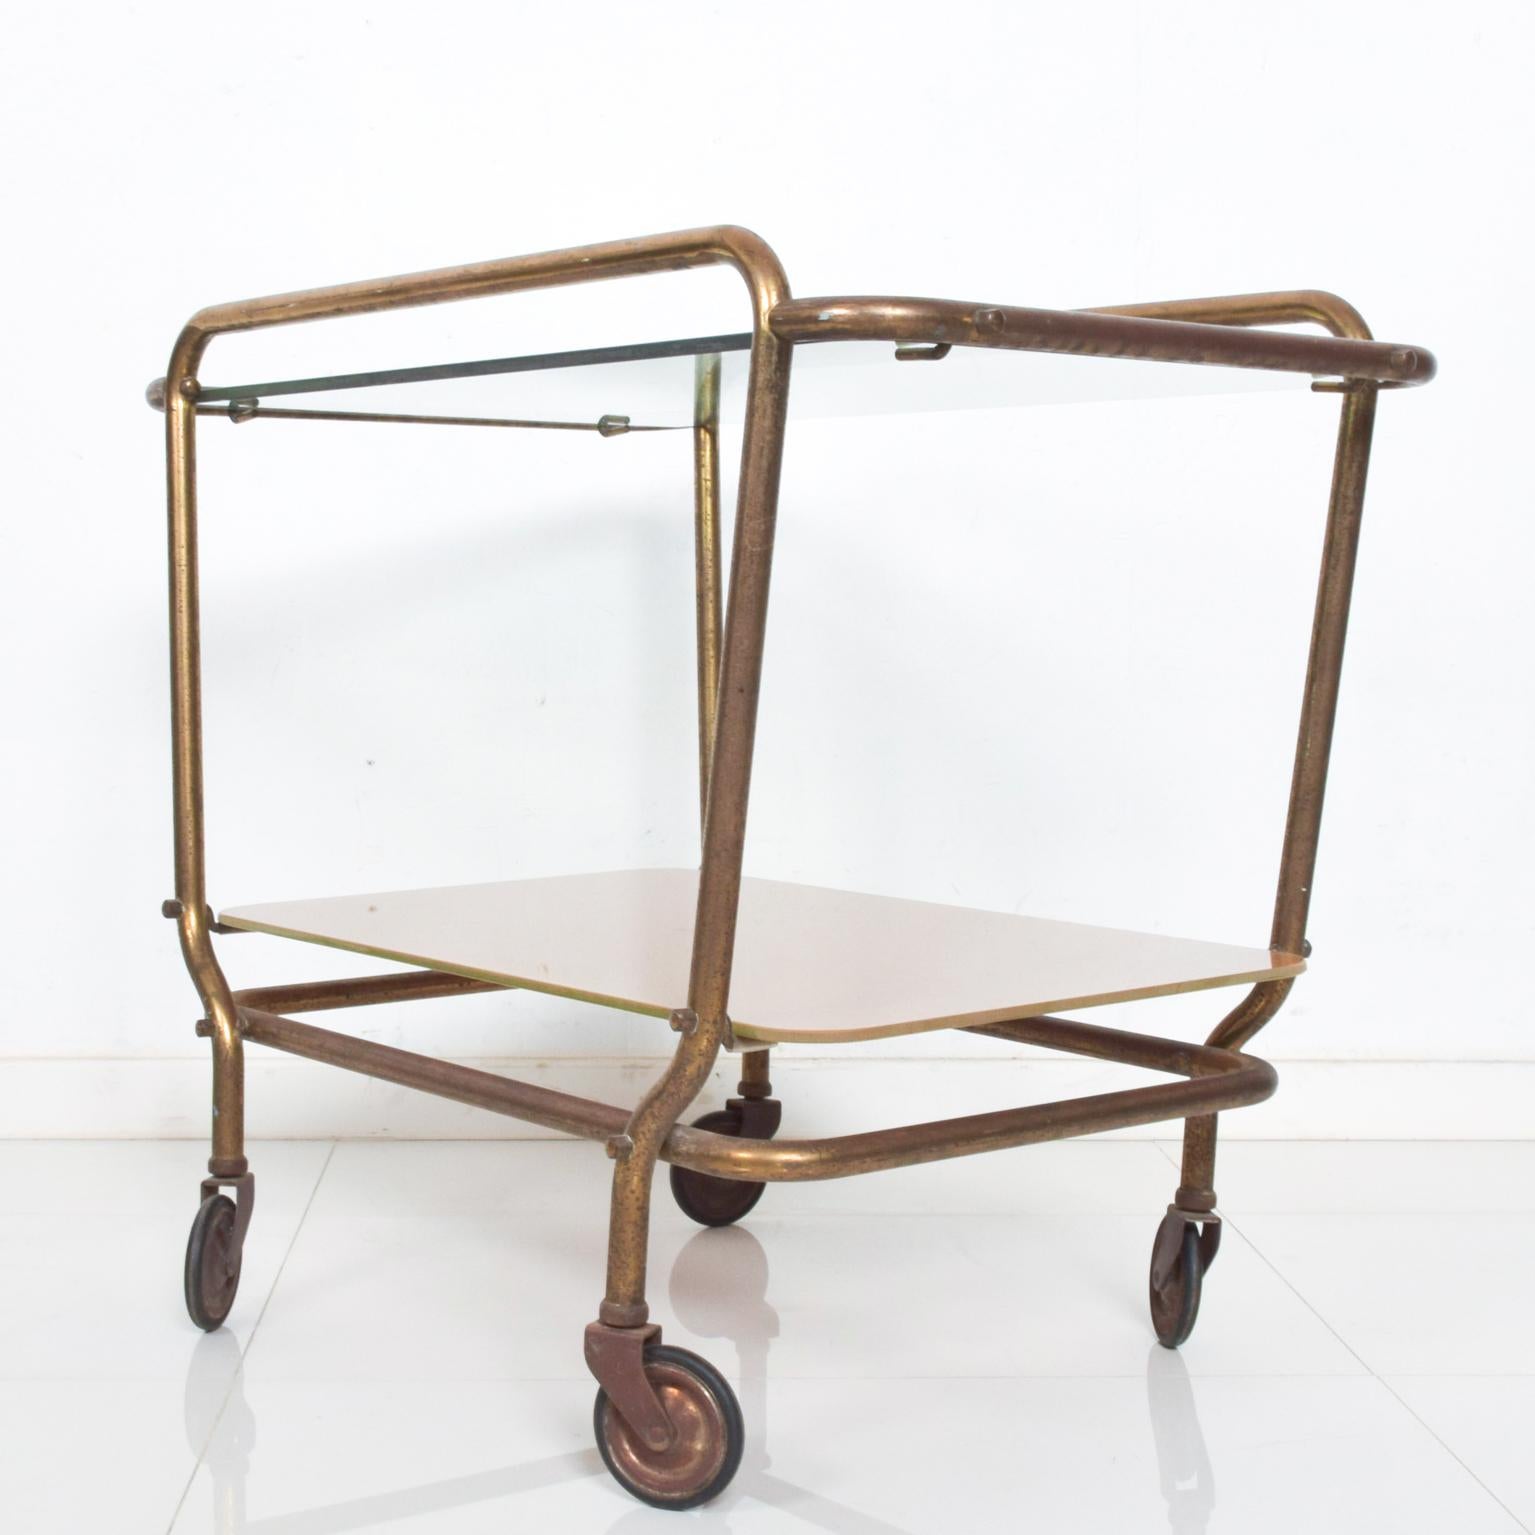 For your consideration: a lovely vintage modern Mexican brass service cart by Arturo Pani.

Body constructed with tubular brass frame. Original vintage wheels, cart features a new glass top. 

Vintage presentation, Mid-Century Modern, 1950s,